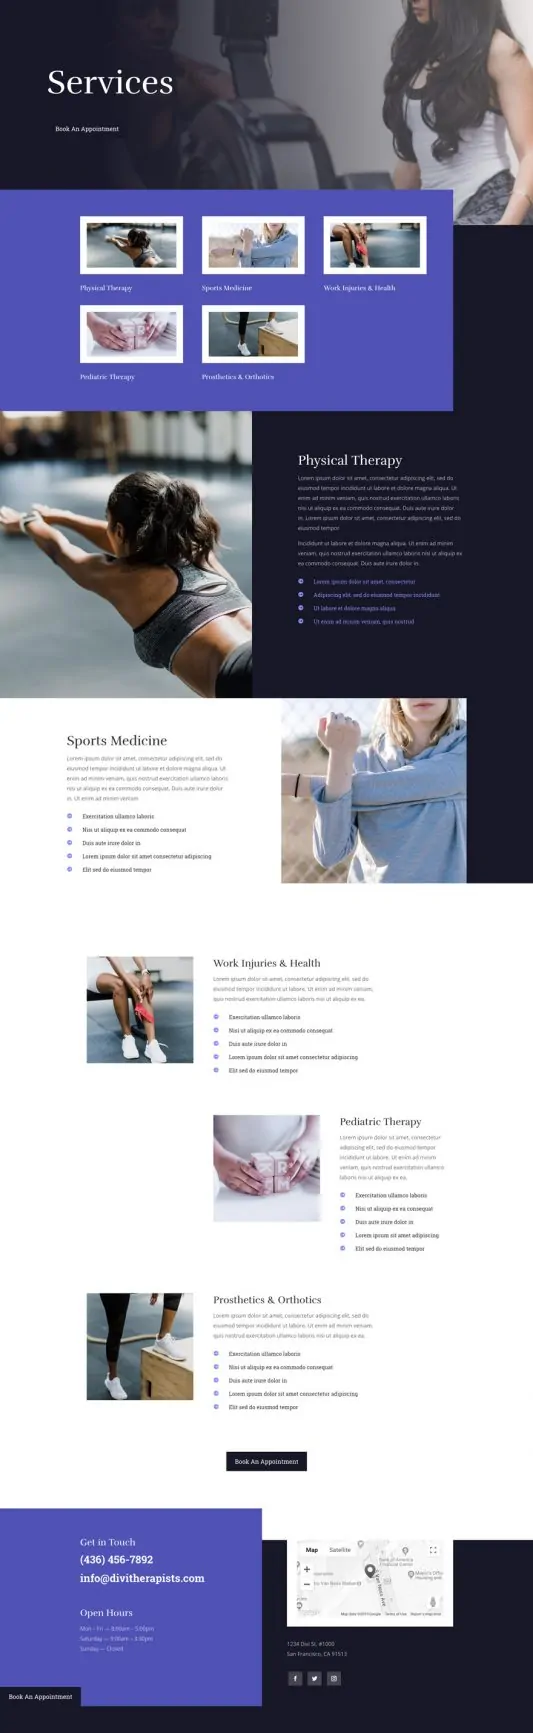 Physical Therapy Services Page Style 1